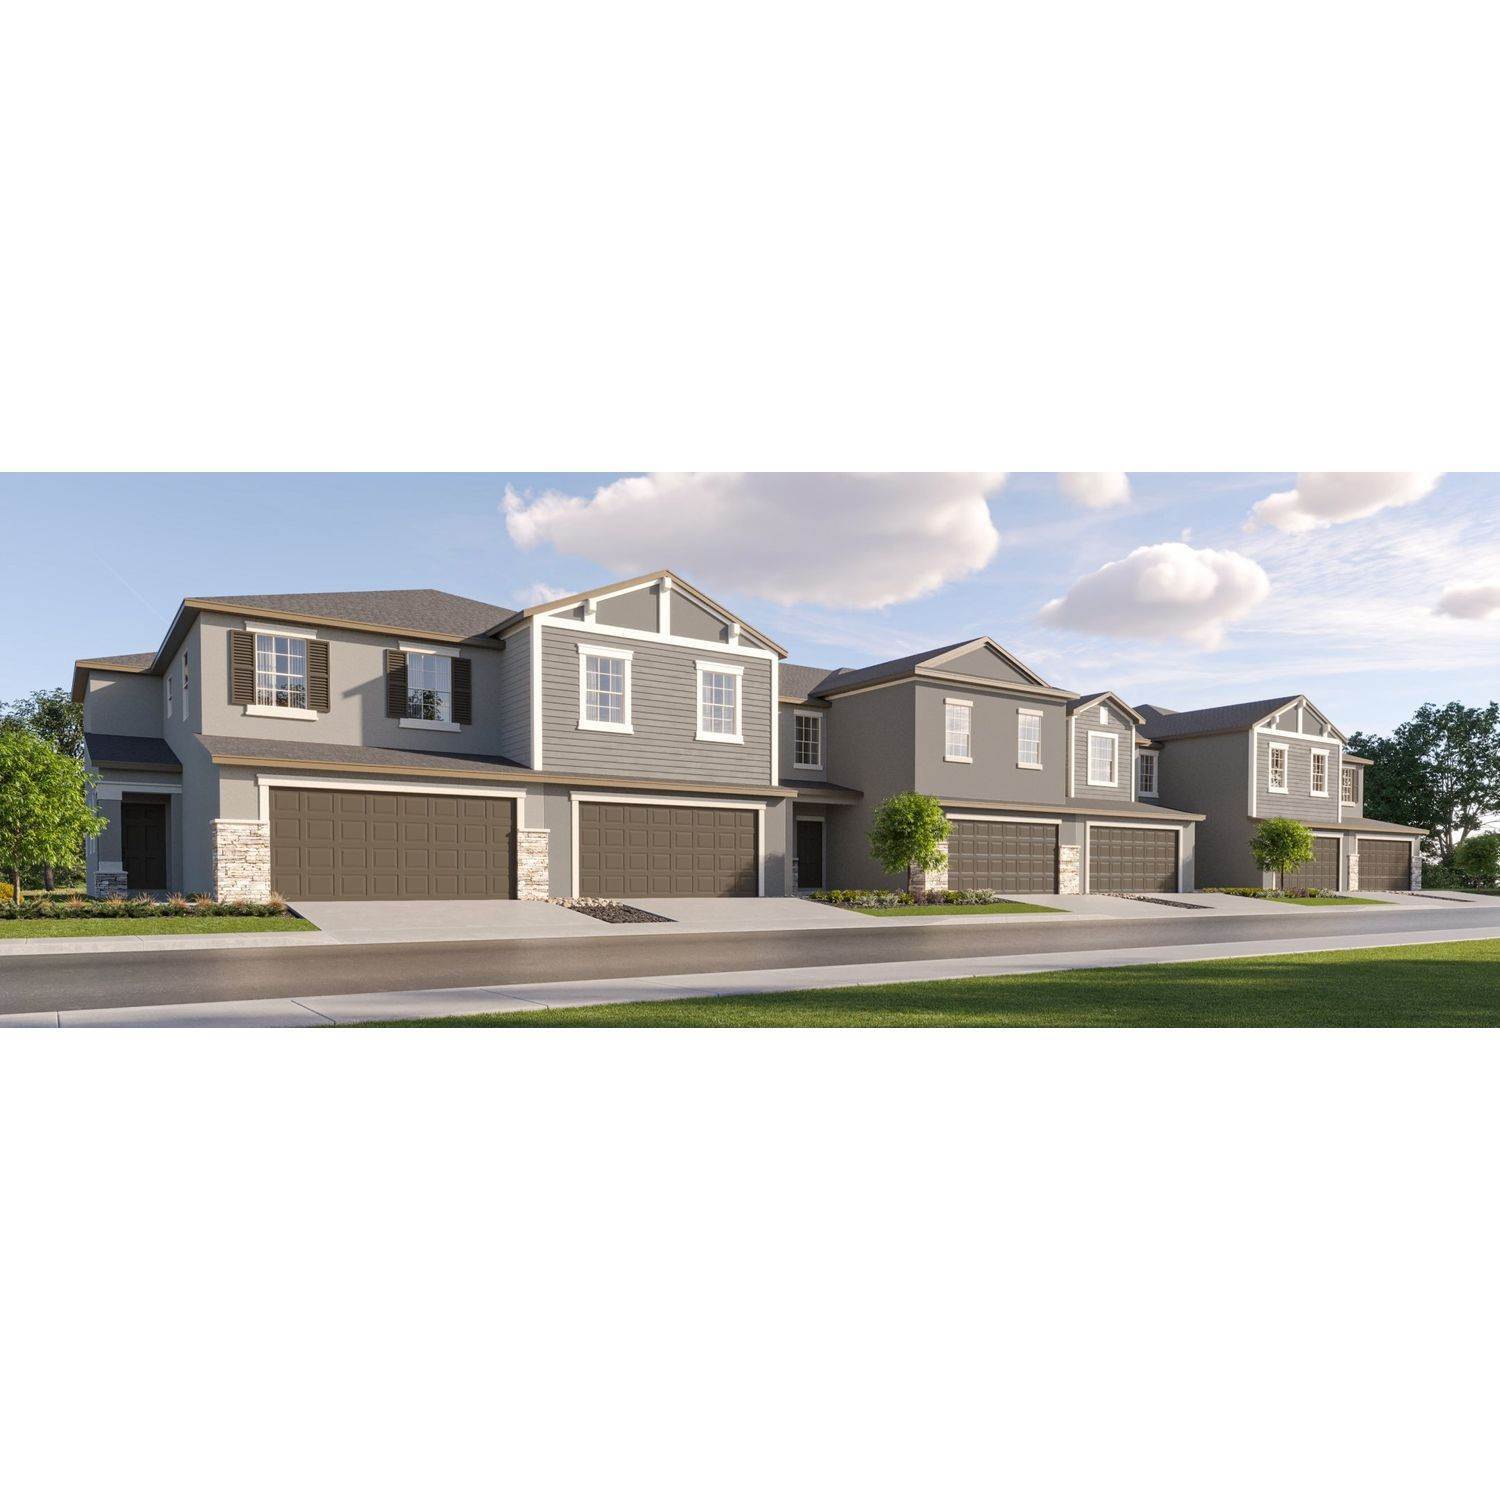 Angeline - The Townhomes κτίριο σε 17516 Nectar Flume Drive, Land O' Lakes, FL 34638